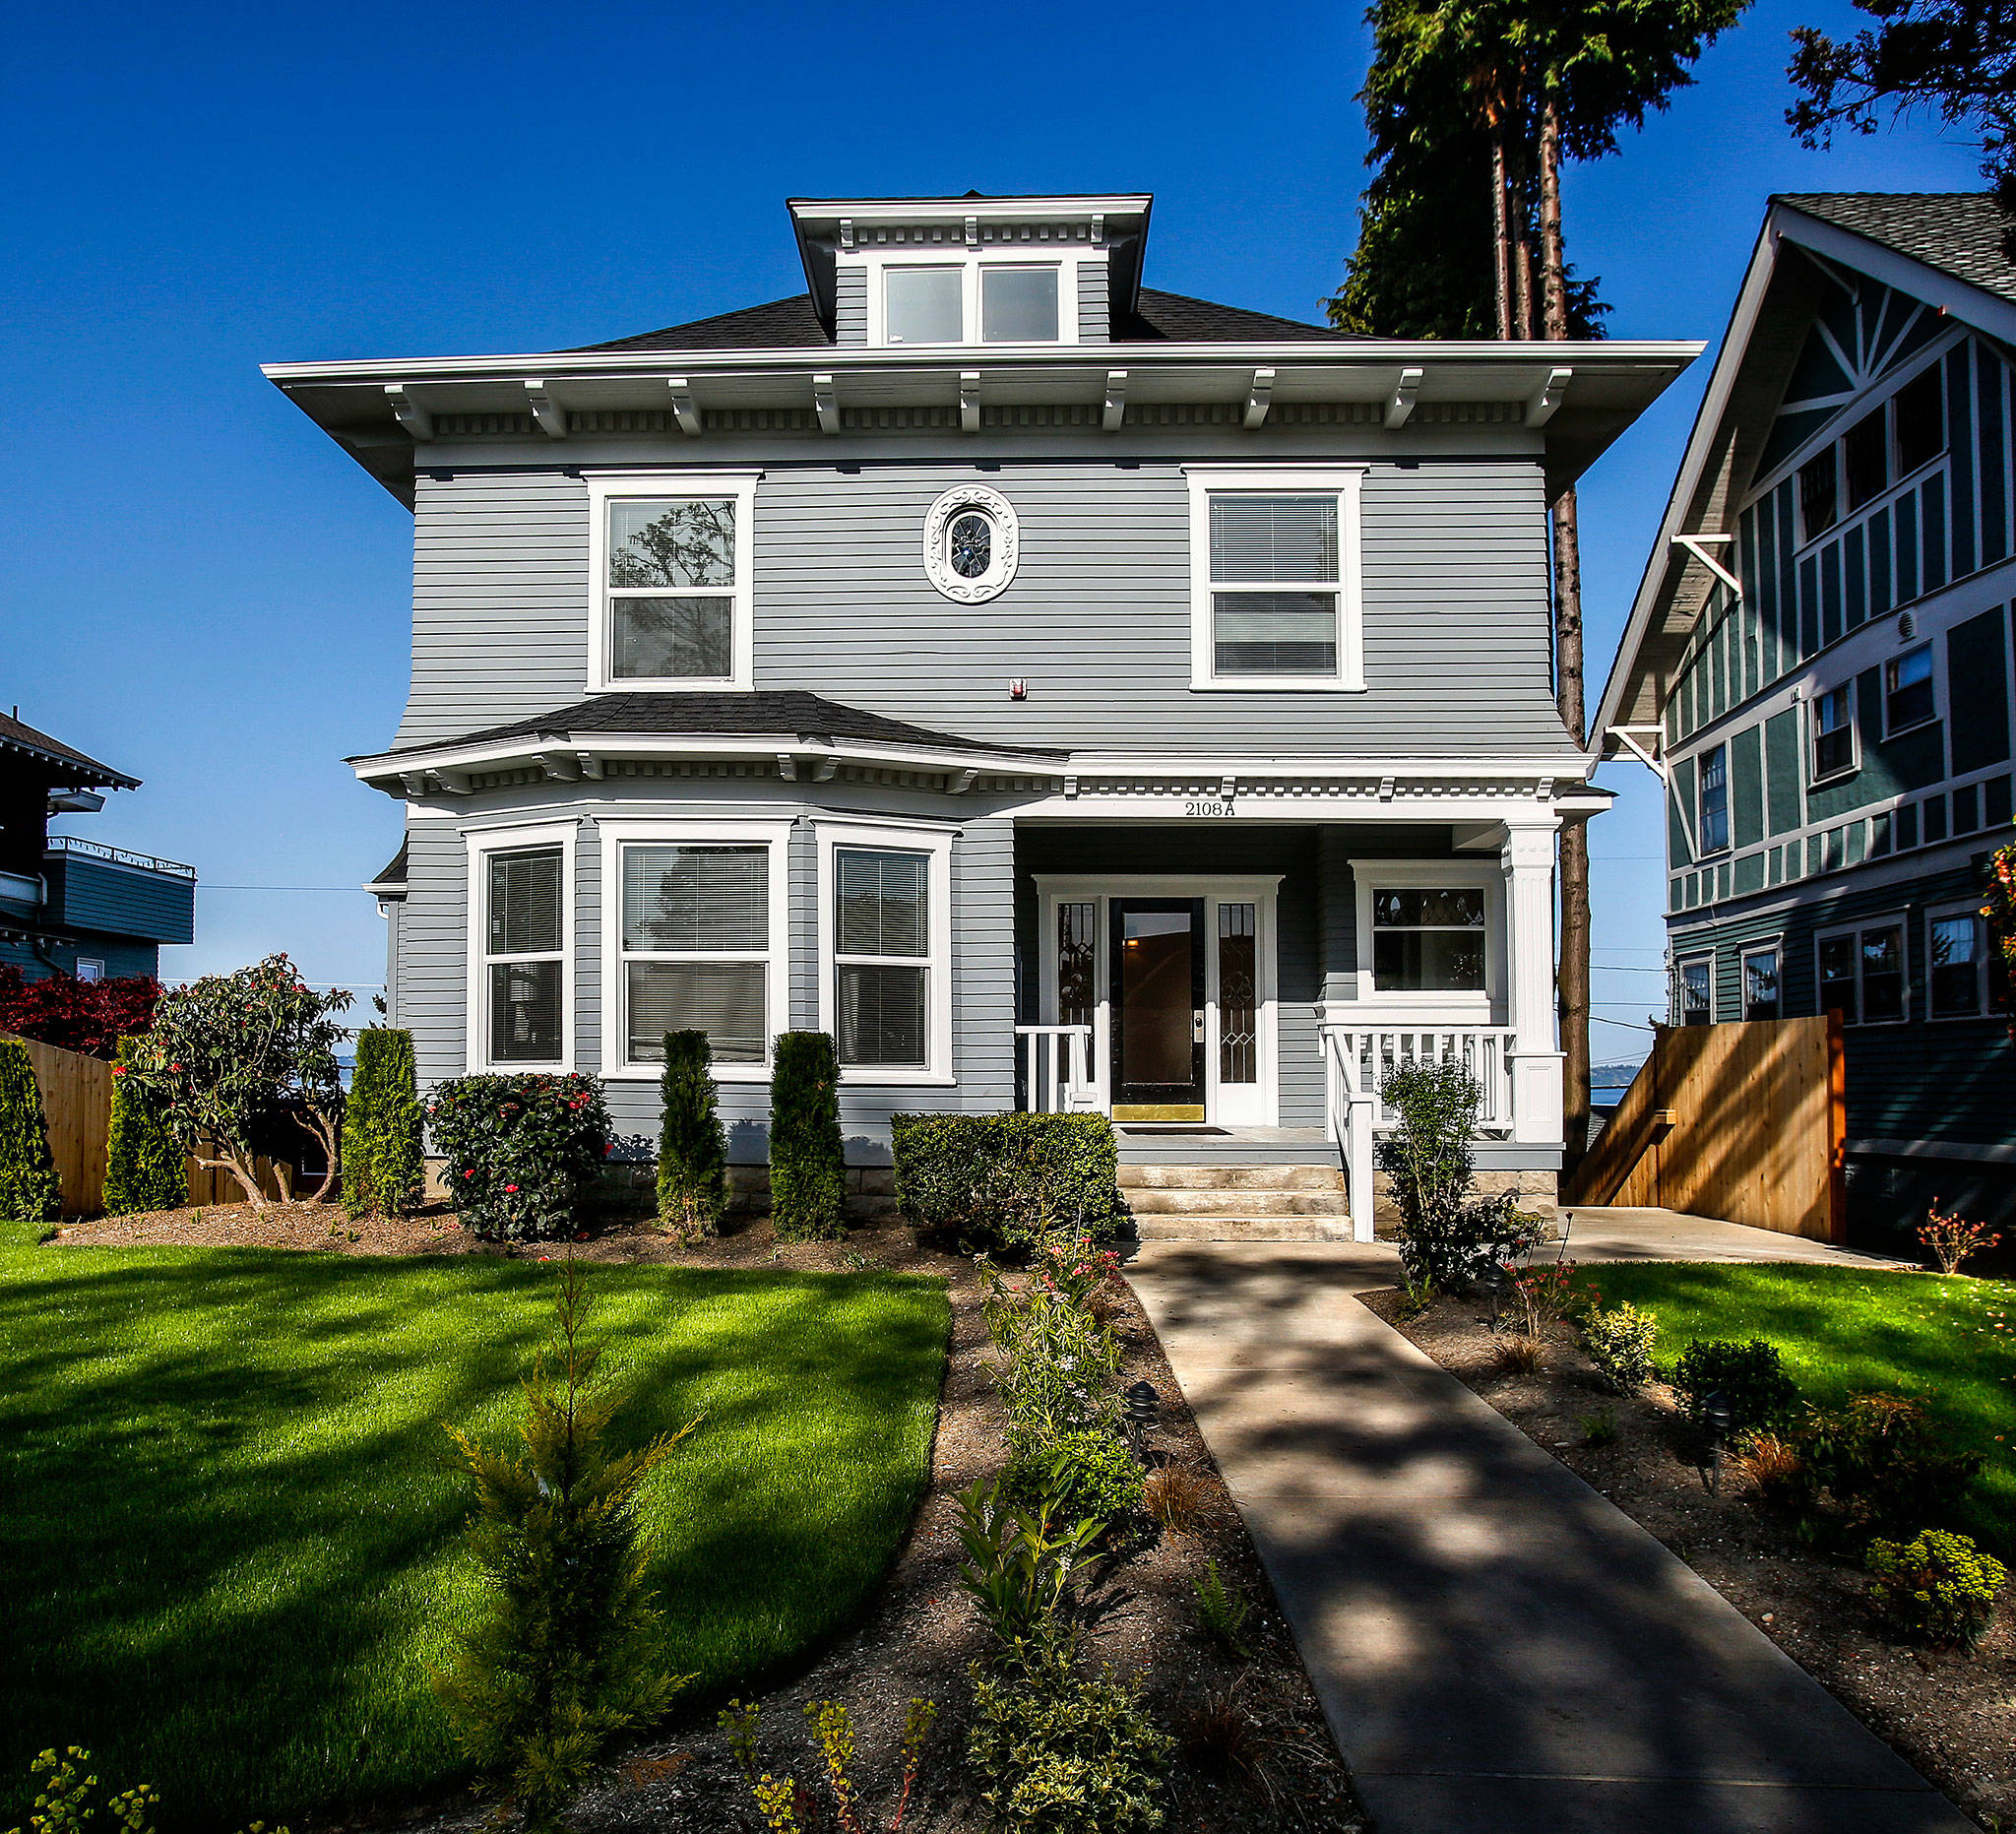 A 1907 beauty of a house at 2108 Rucker Ave. in Everett has been restored and renovated into six apartments after sitting empty and in disrepair for 15 years. Its owners now seek listing on the Everett Register of Historic Places.The house is next to the one Everett’s Bill Belshaw renovated in 2012. (Dan Bates / The Herald)